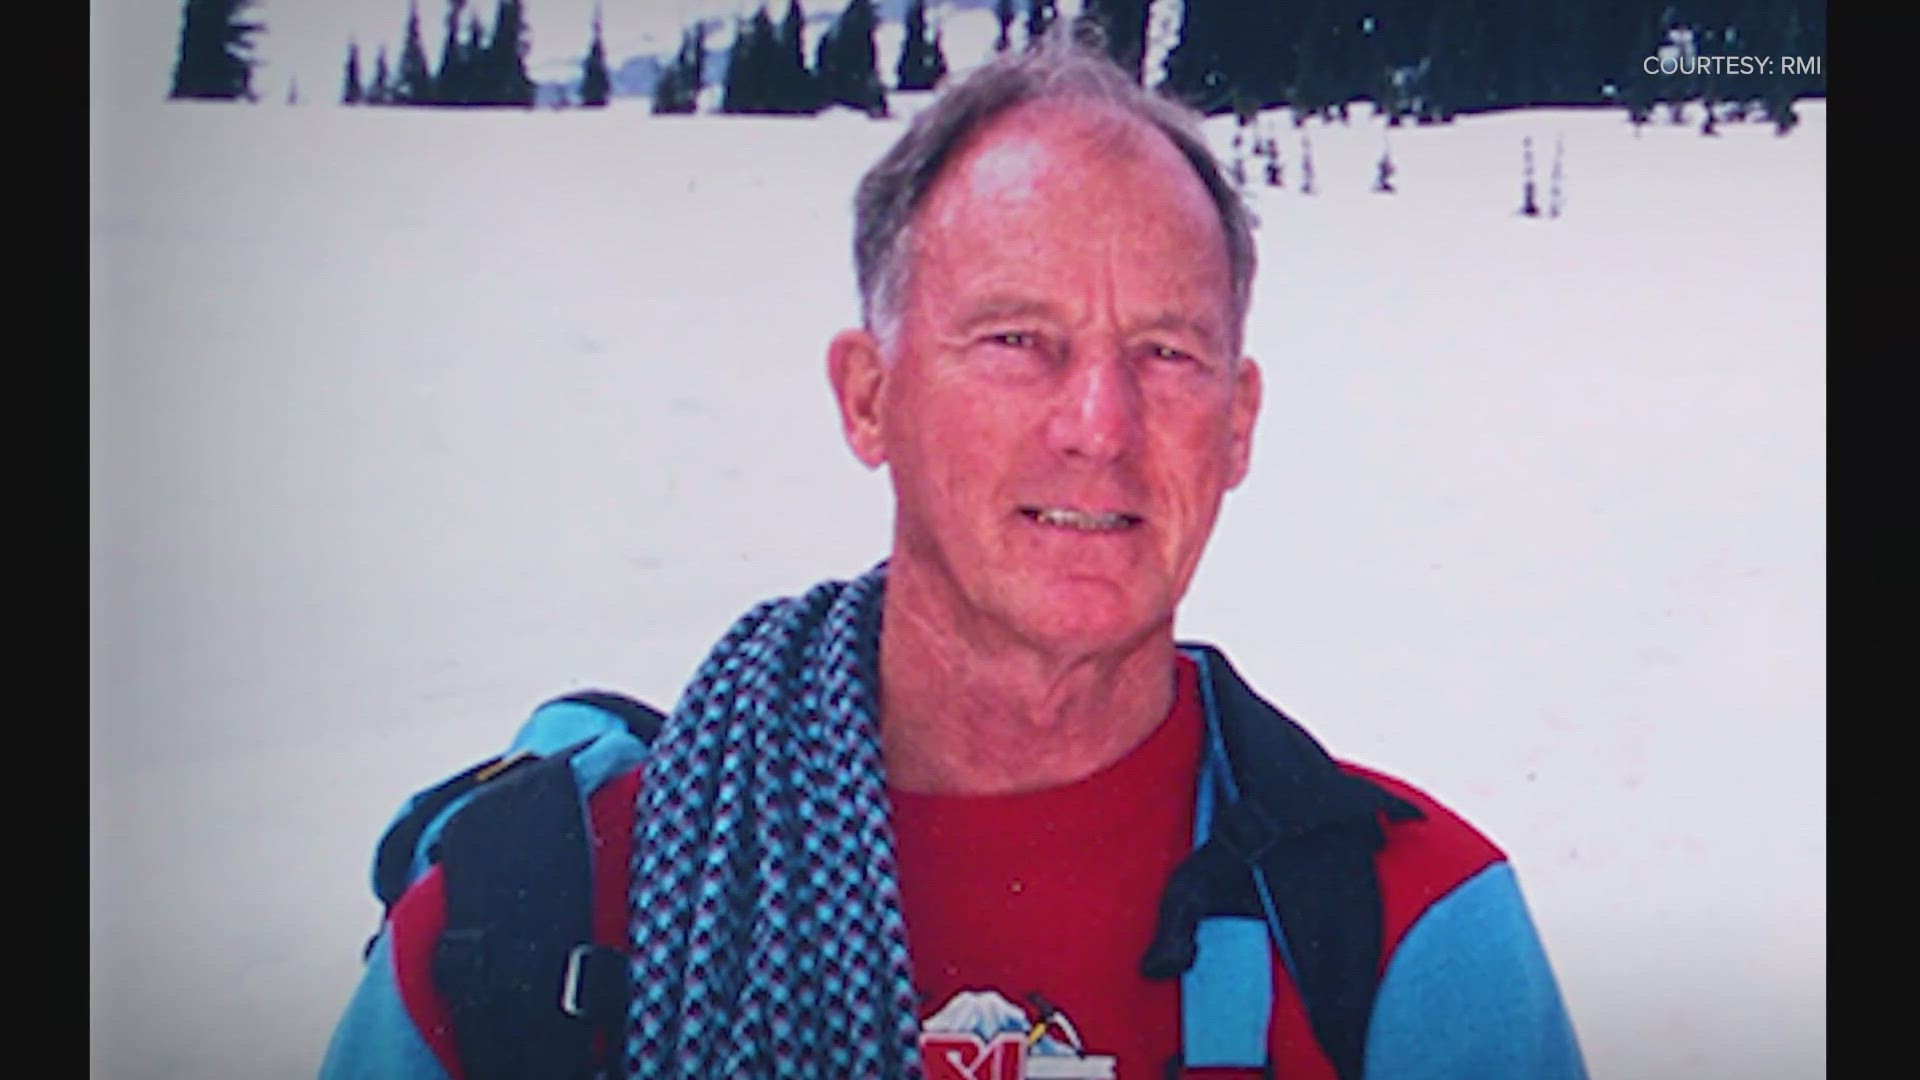 Peter Whittaker sits down with KING 5 to talk about his father,  Lou Whittaker, the legendary American mountaineer.